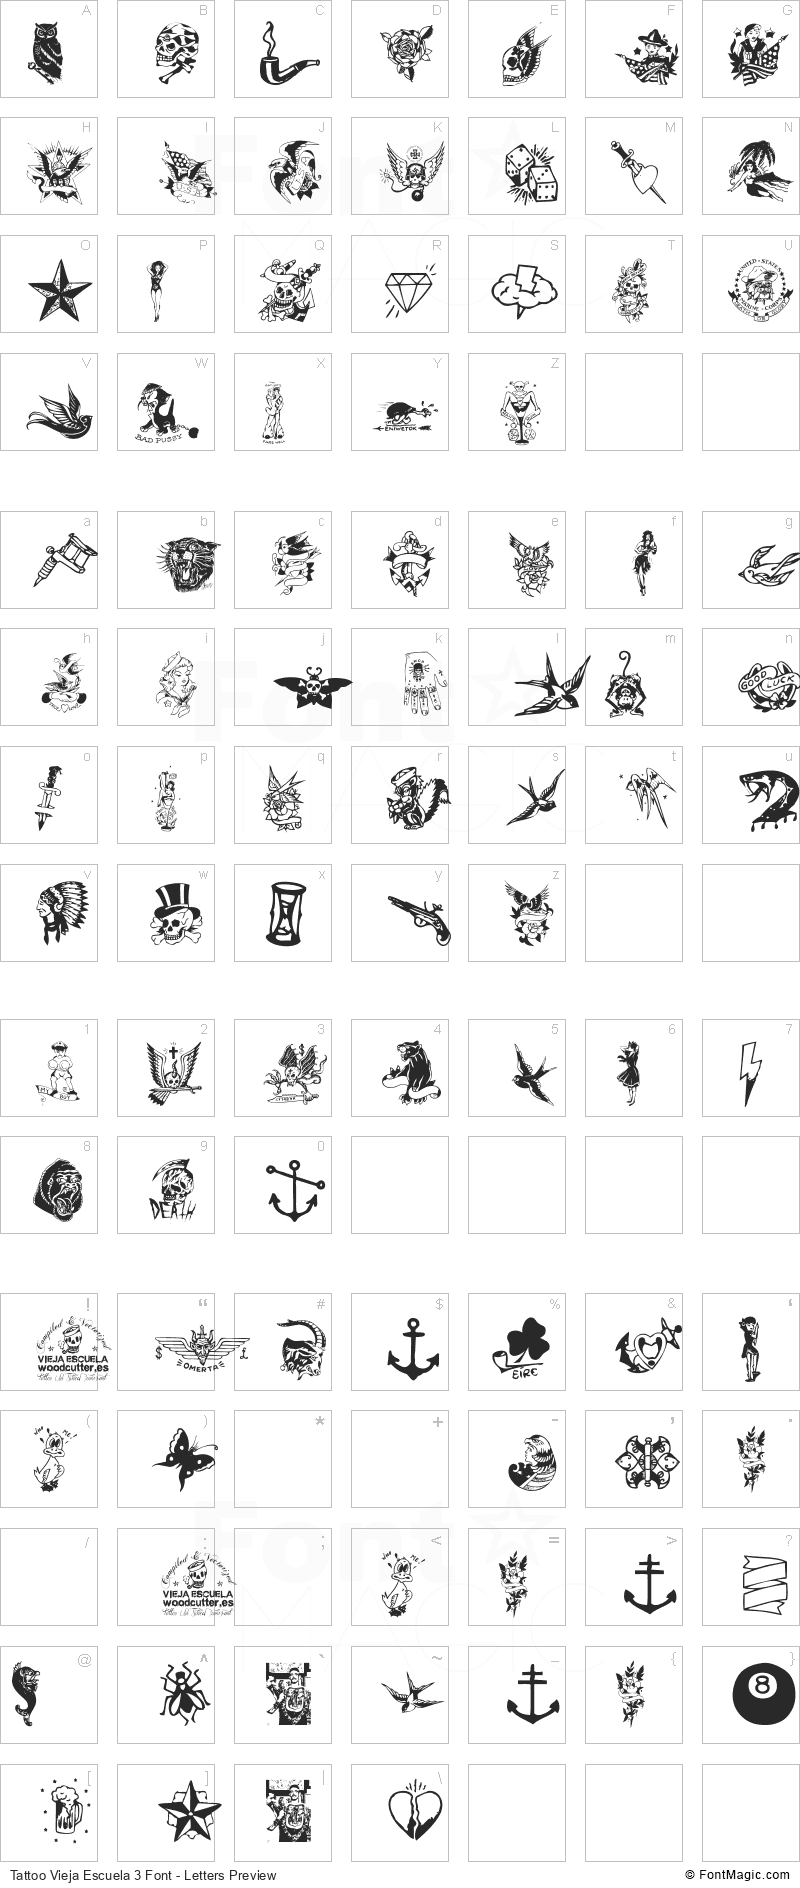 Tattoo Vieja Escuela 3 Font - All Latters Preview Chart